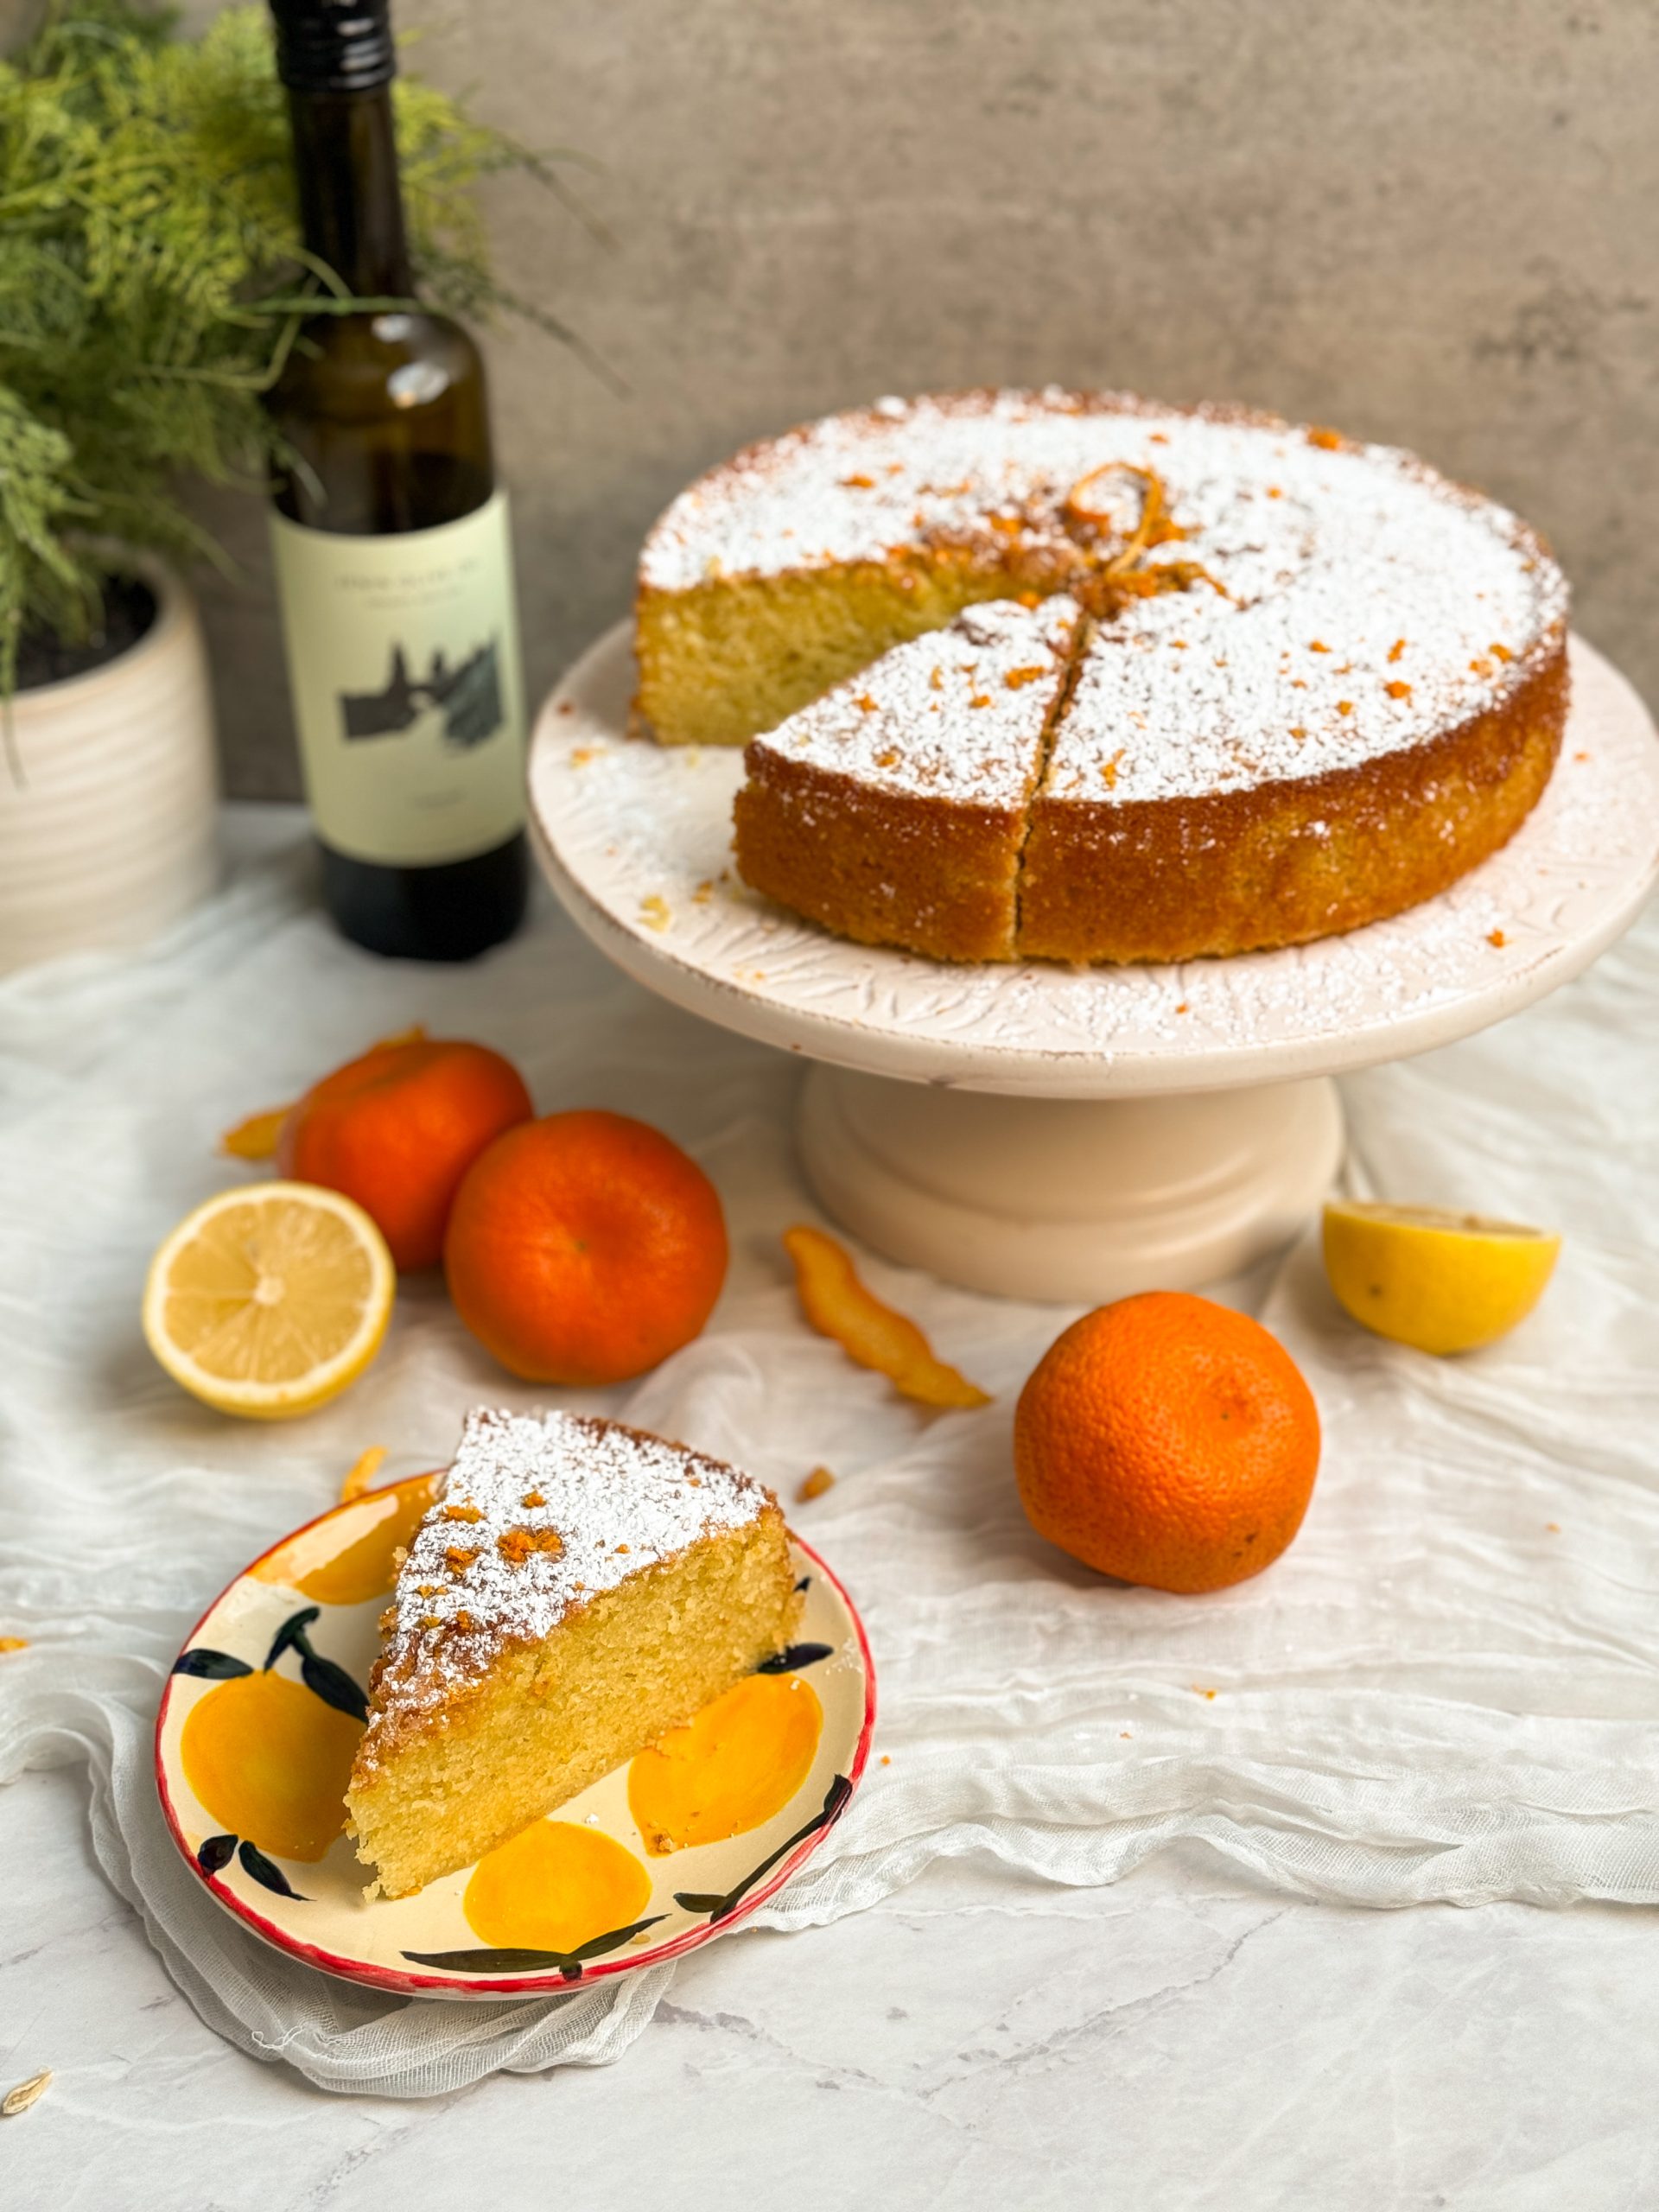 orange olive oil cake on a white cake stand, dusted with powdered sugar and decorated with lemon zest. cake has a beautiful golden color. Oranges placed on the side, olive oil bottle in the back. Cake is sliced, and a slice is placed on a small plate in the front